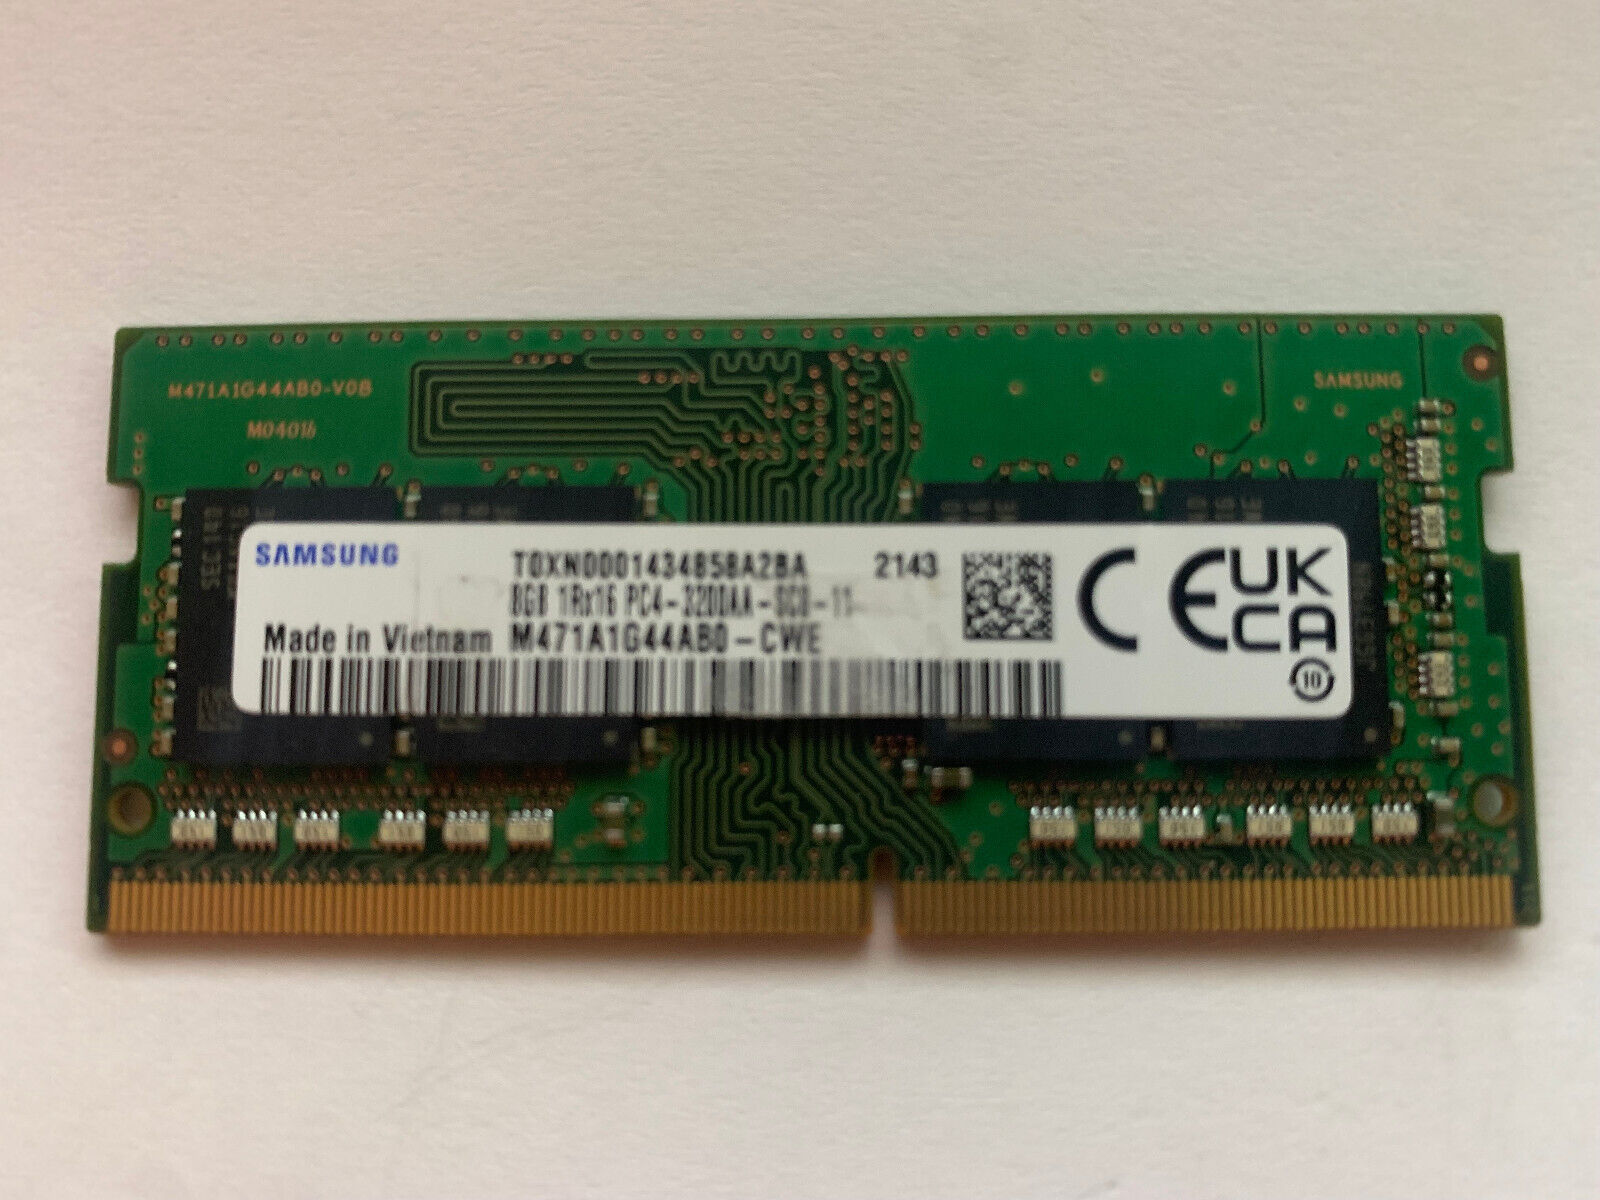 LOT OF 100ea Samsung 8GB DDR4 3200 MHz PC4-25600 Laptop SODIMM 260 pins